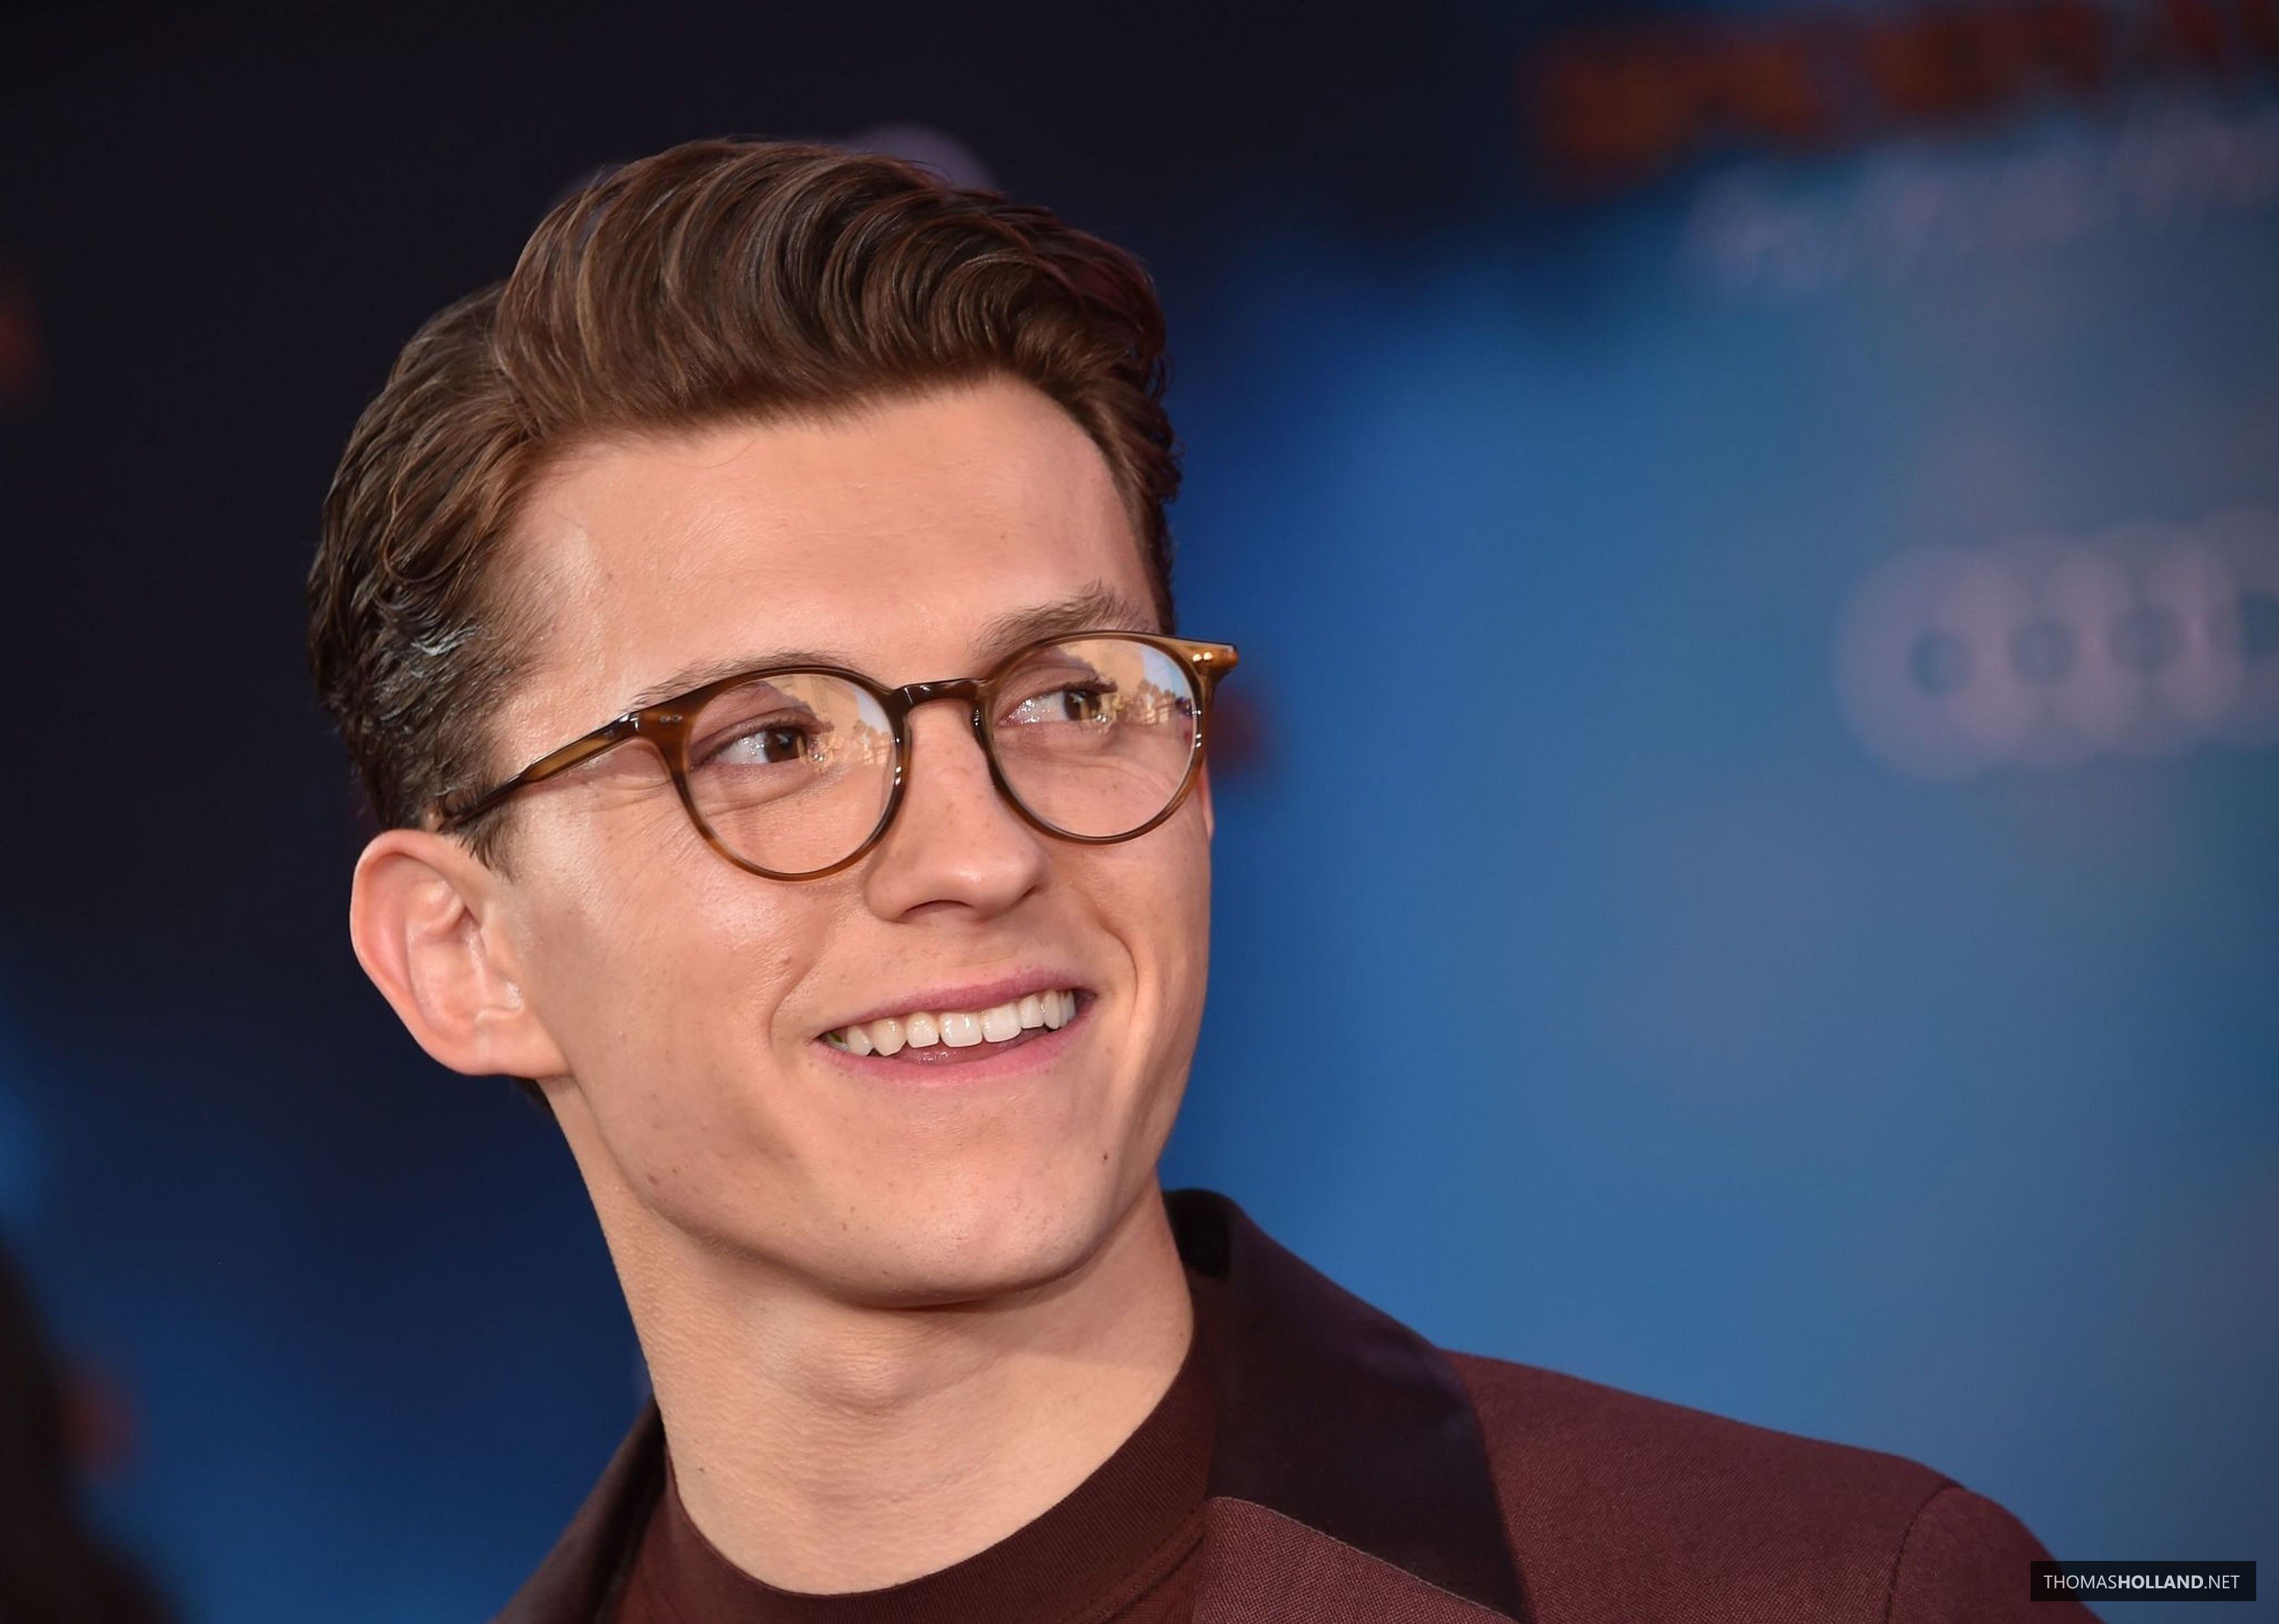 JUNE 26TH - Spider-Man: Far From Home Los Angeles Premiere - 040 - Tom ...